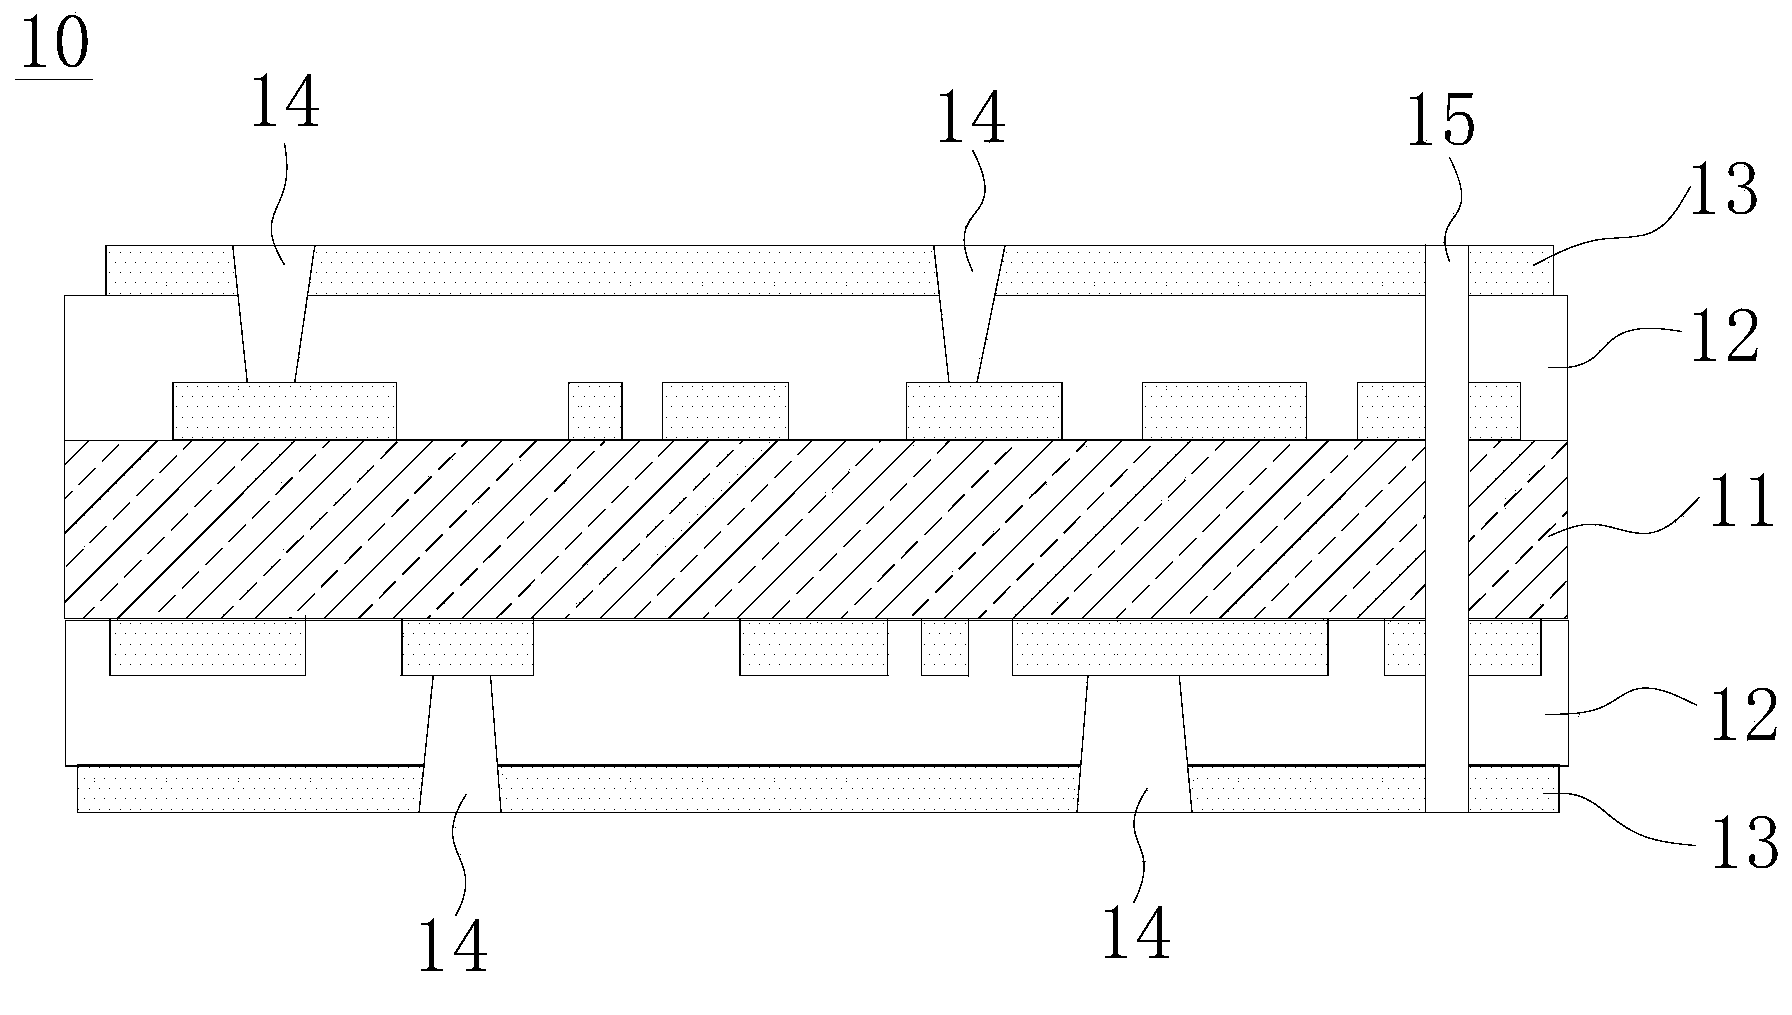 Method for manufacturing plated-through holes in HDI plate